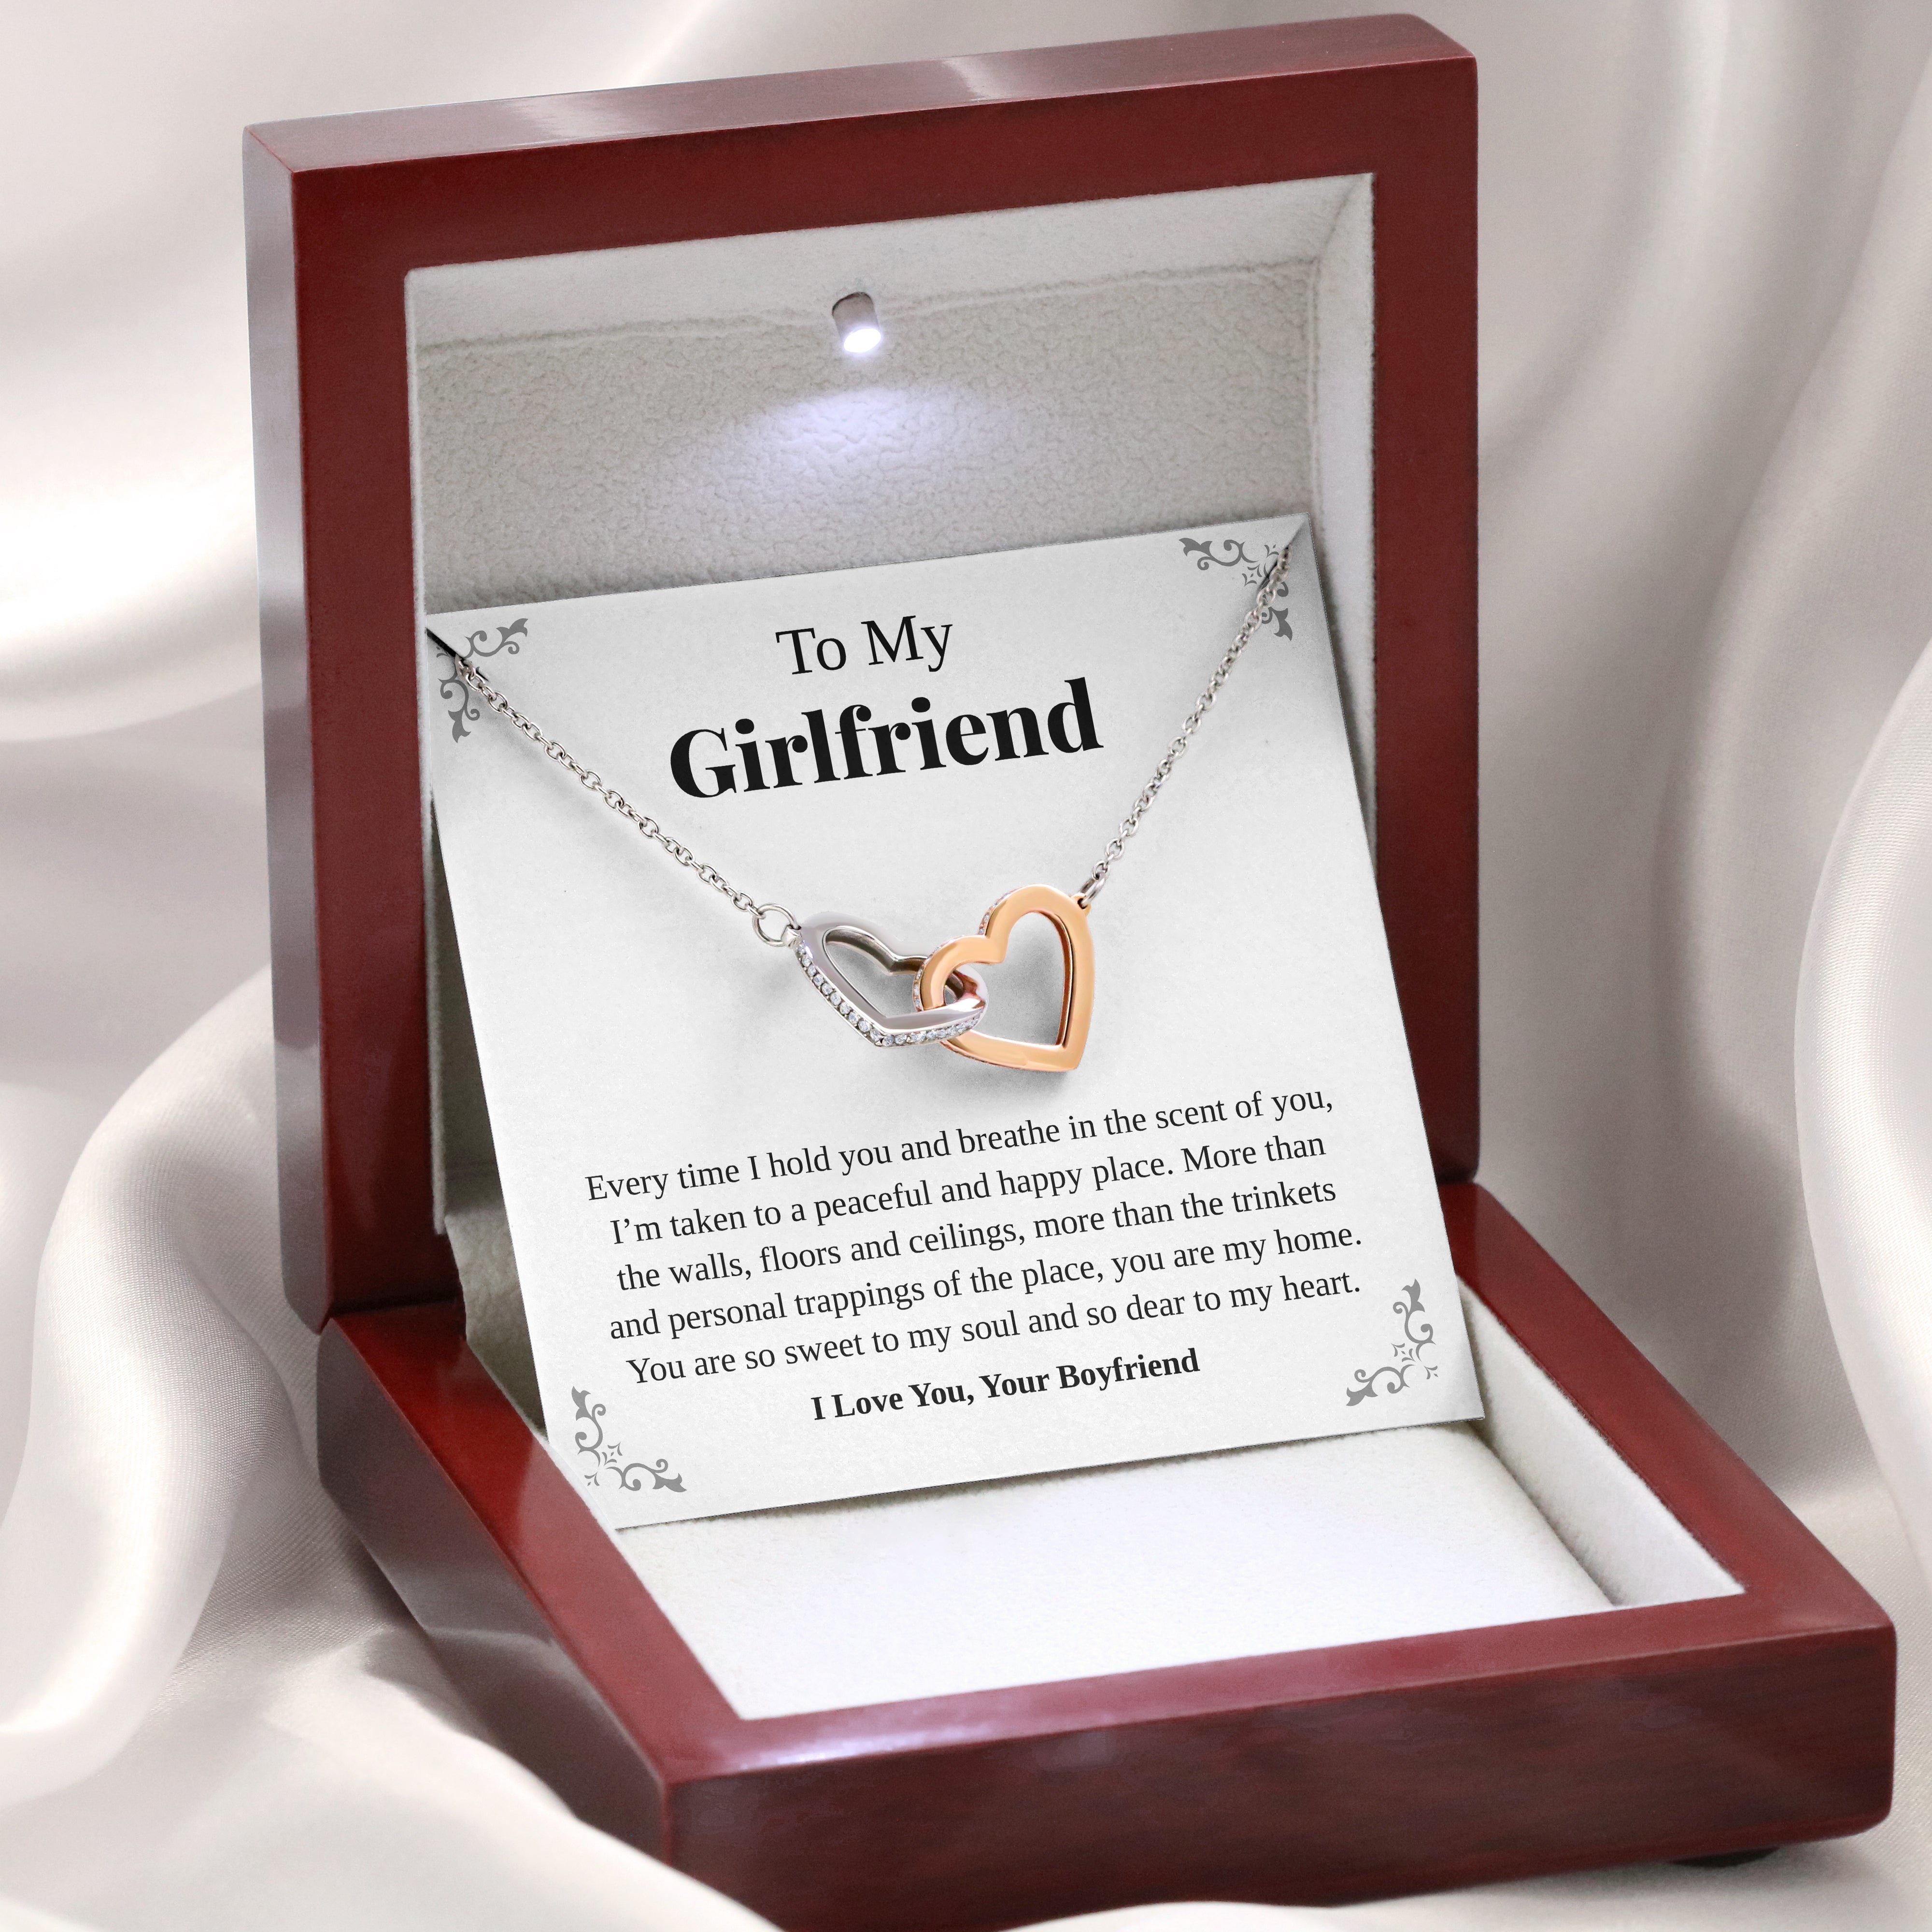 To My Girlfriend | “The Scent of You” | Interlocking Hearts Necklace